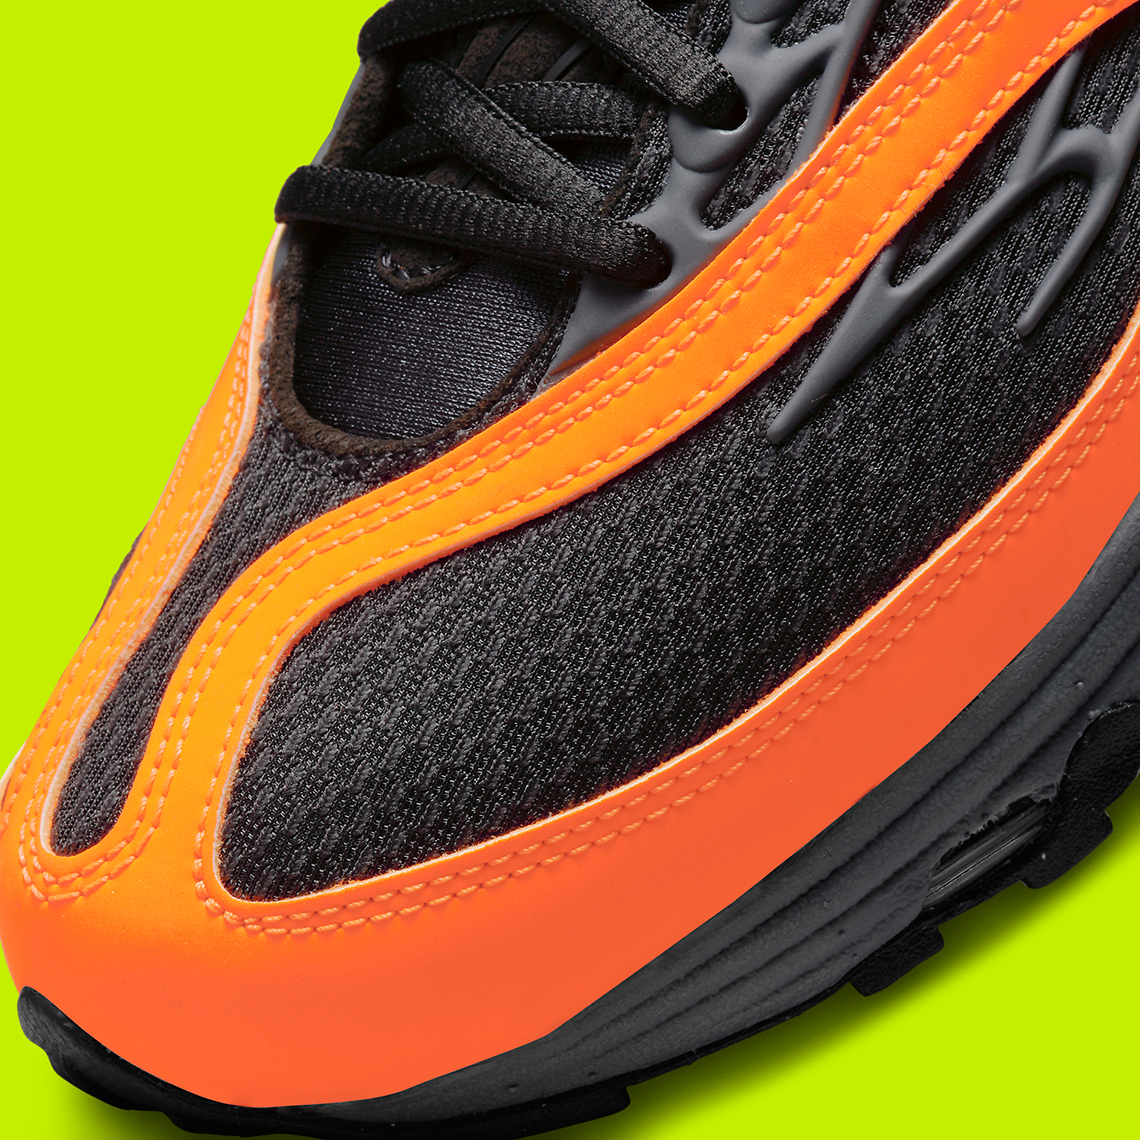 Nike Air Tuned Max Volt Orange Grey Dh4793 700 Release Date 1